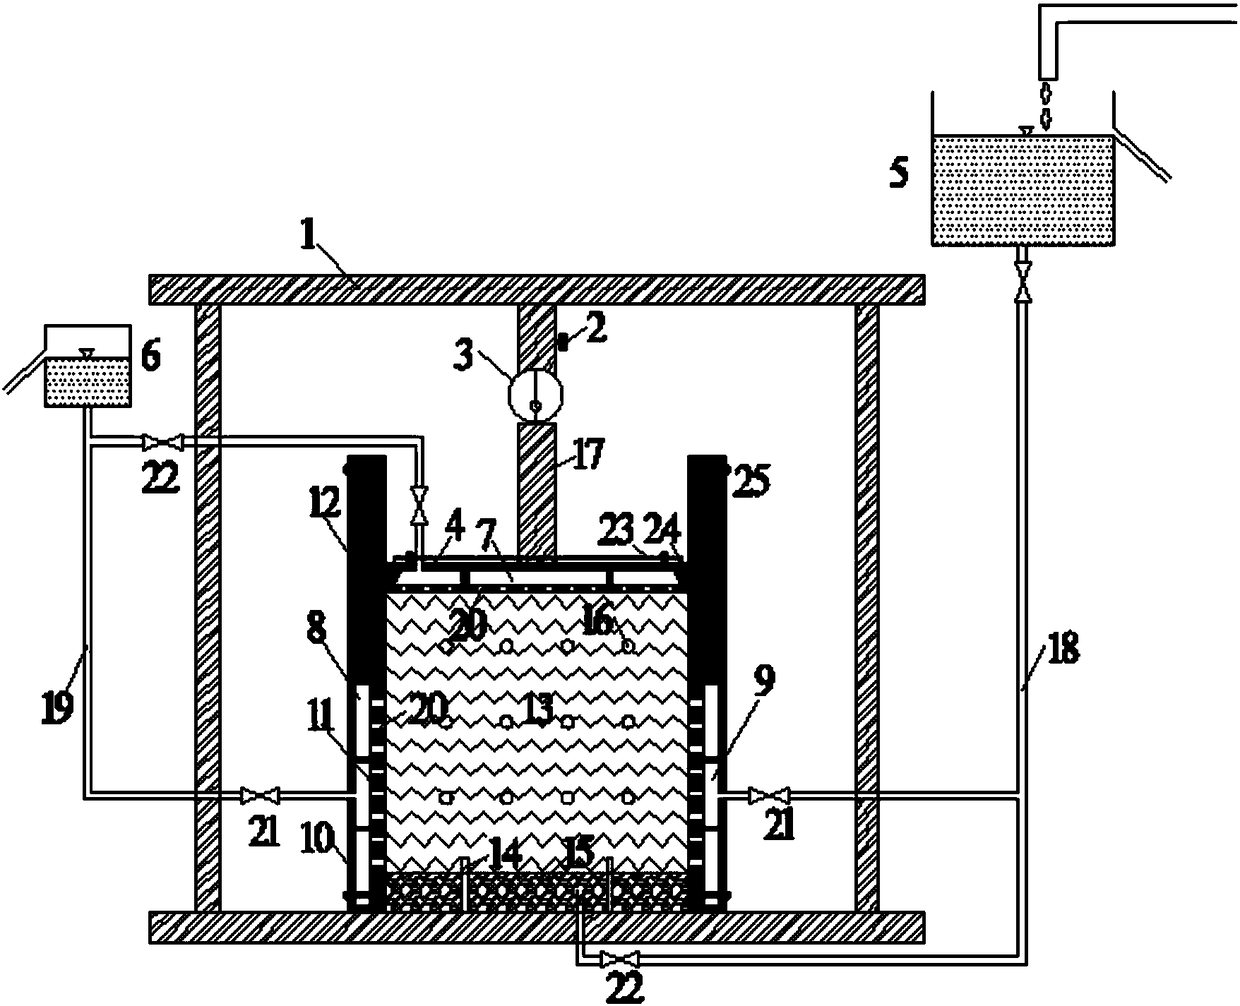 Test device for testing horizontal and vertical saturated infiltration coefficients of coarse-grained soil simultaneously indoors under different pressure